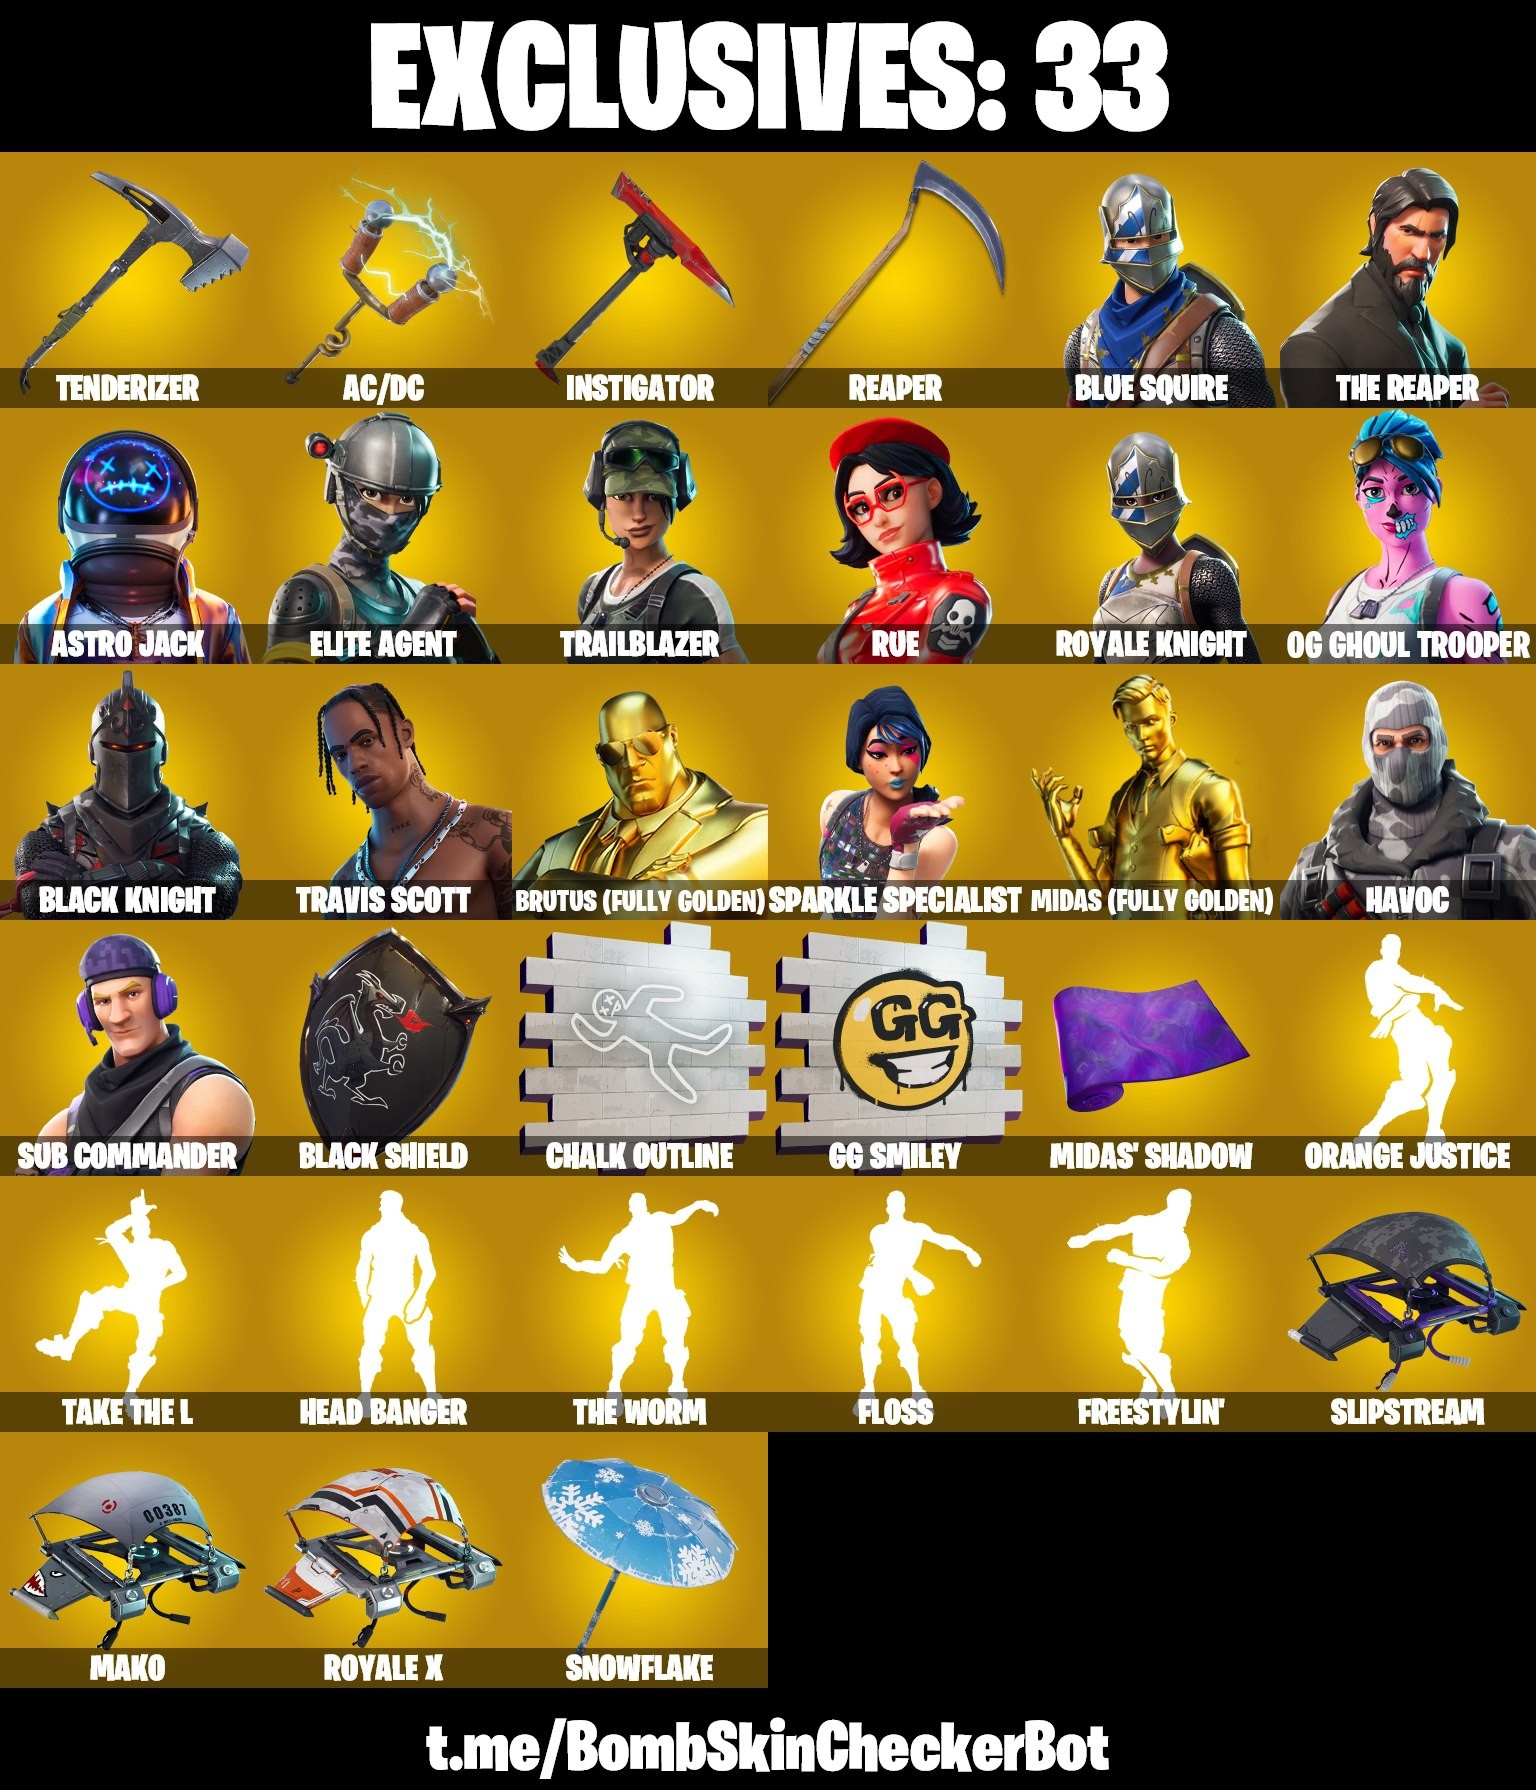 OG Pink Ghoul Trooper !! Black Knight 179 skins  RUE, Travis Scott, The Reaper, Take The L, Floss, Sparkle Specialist FULL MAIL & ACCOUNT ACCESS